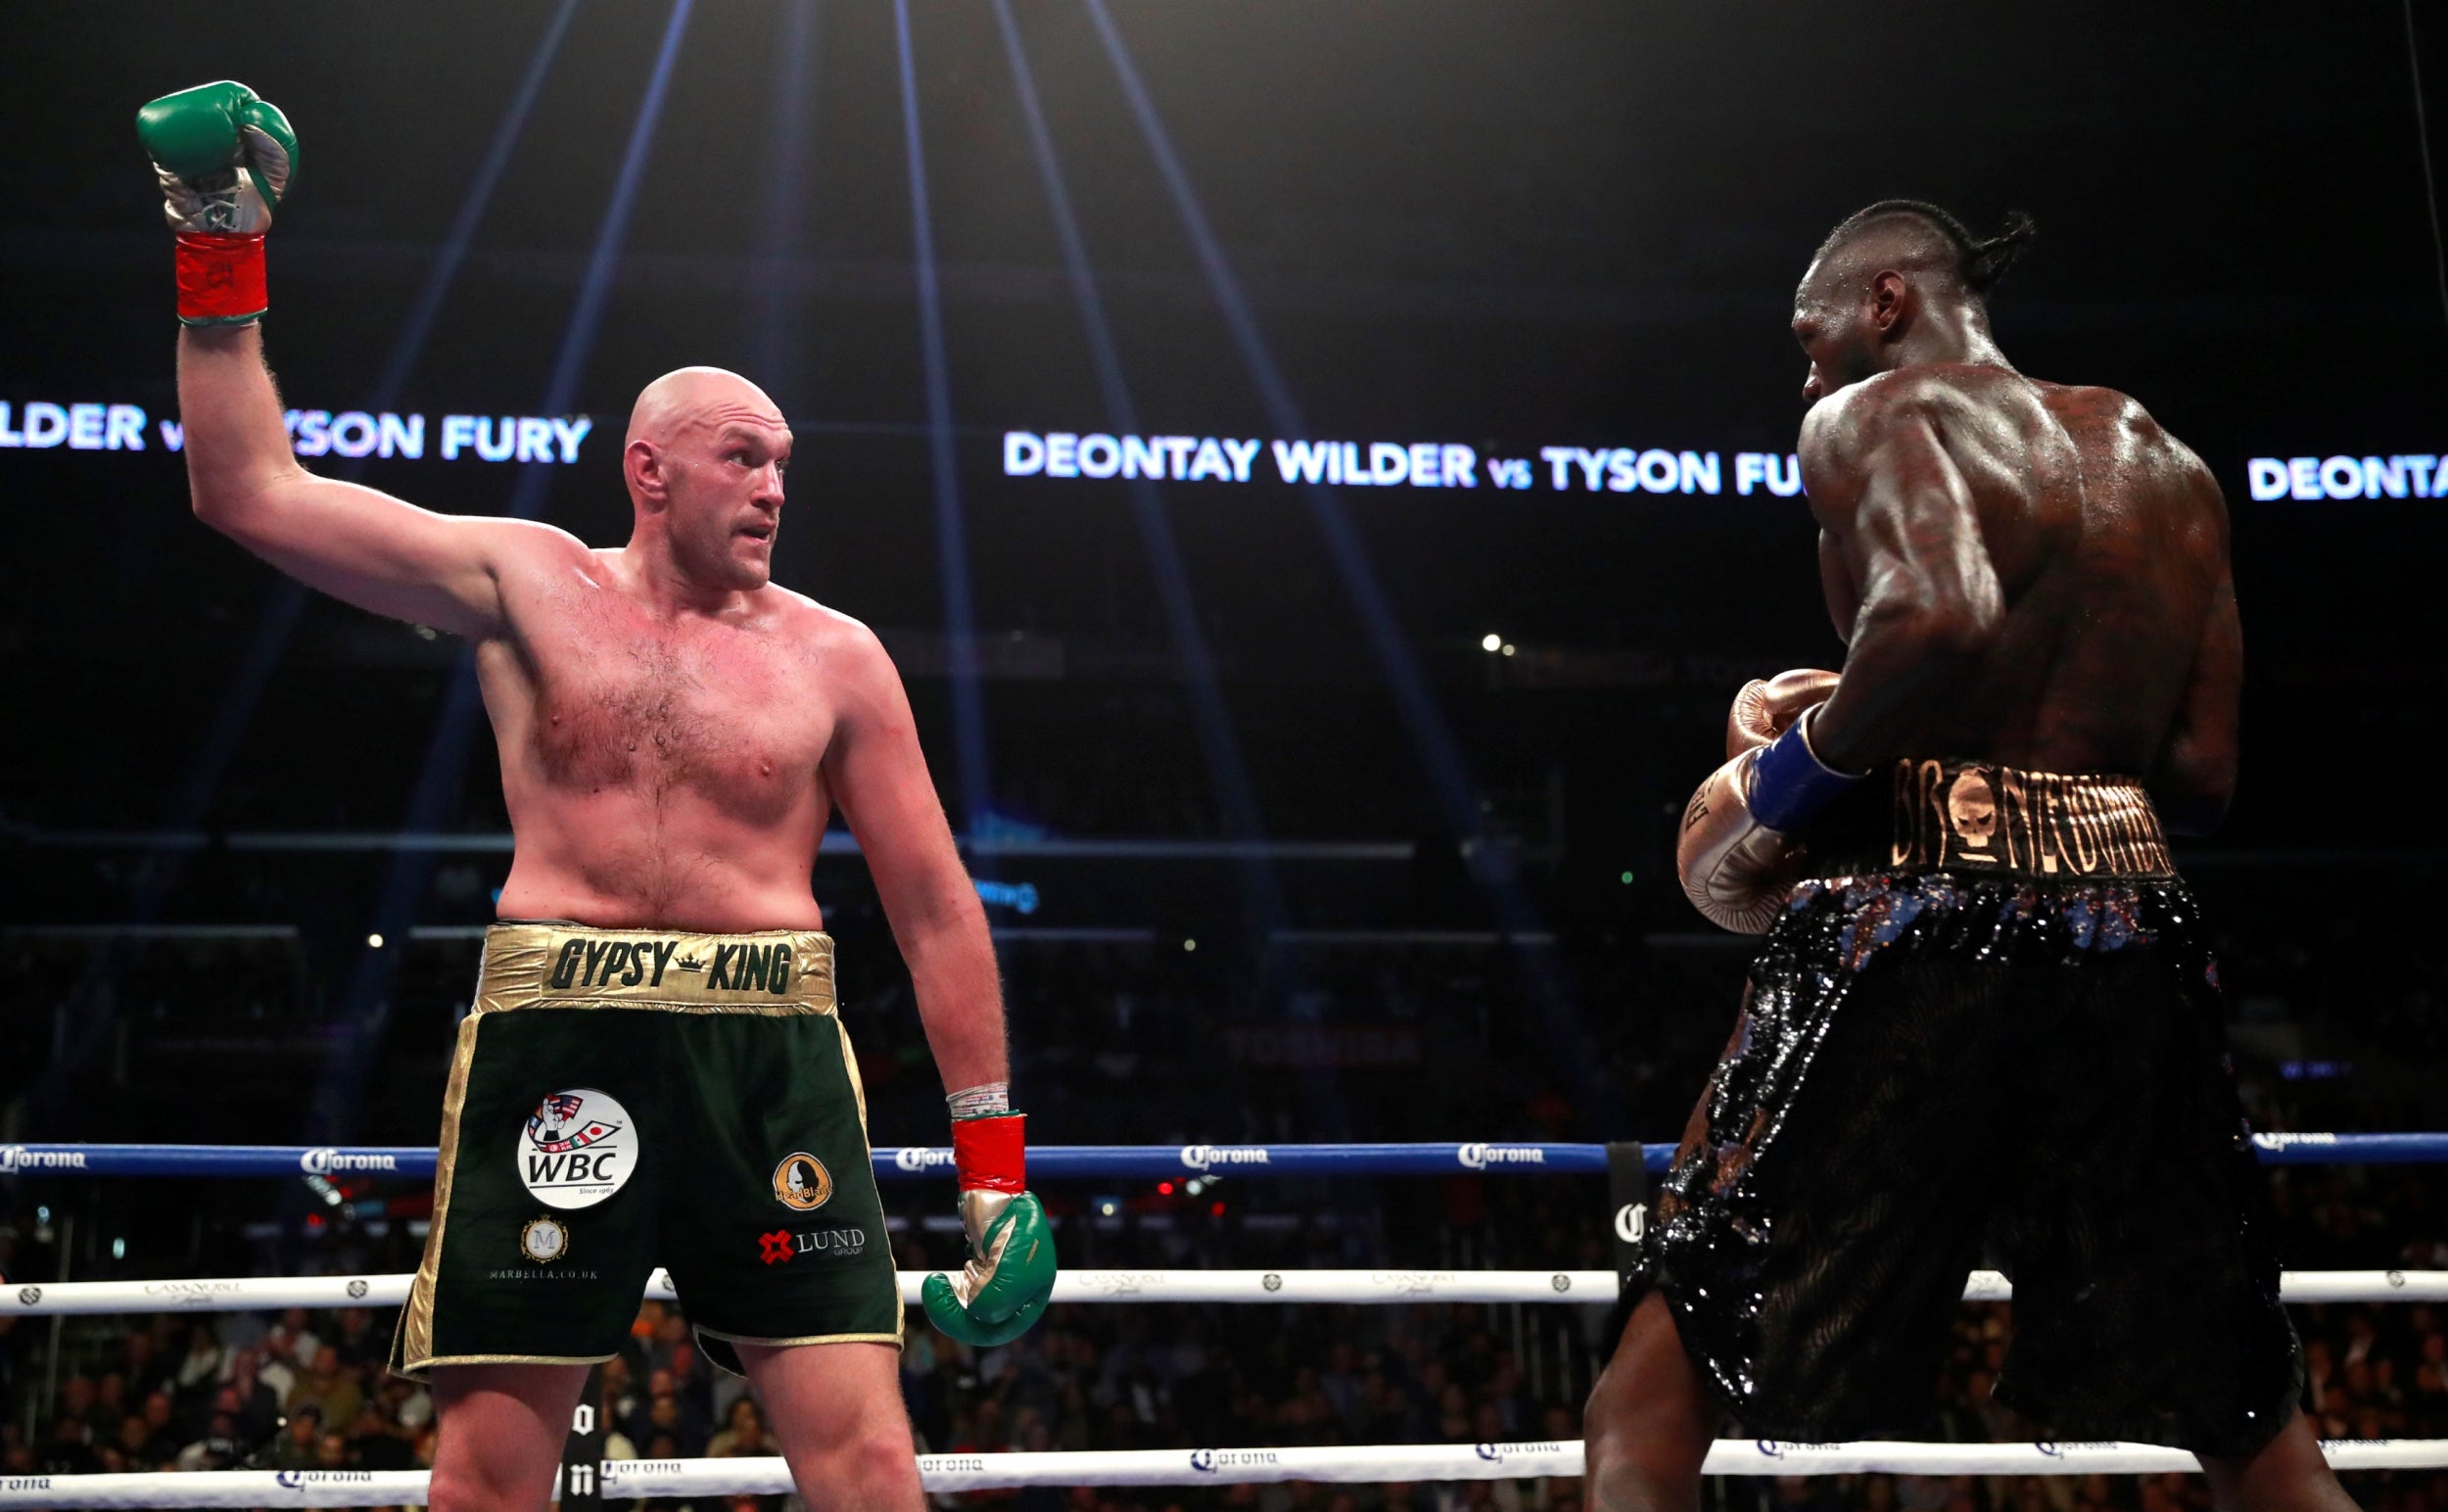 Heres how you can watch the Deontay Wilder v